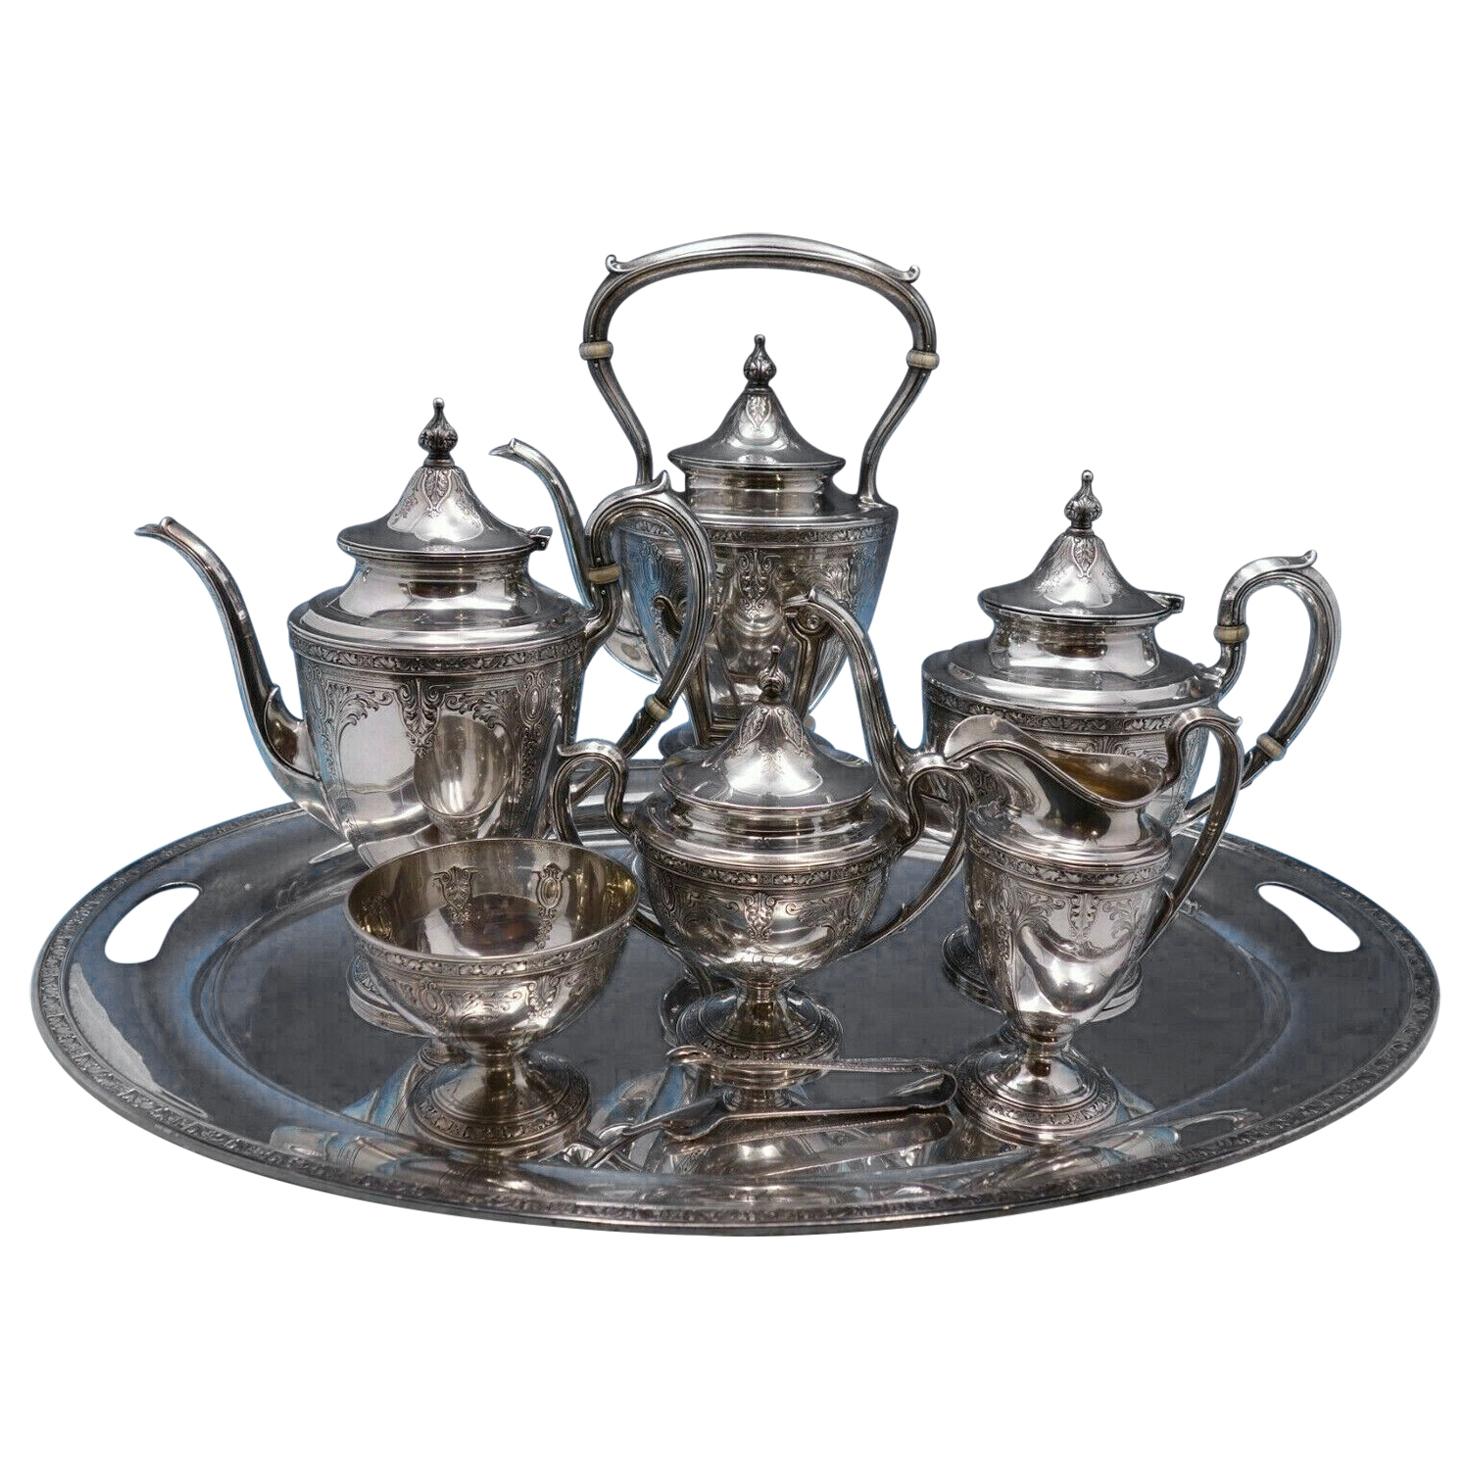 Cinderella by Gorham Sterling Silver Tea Set of 7 Piece with Silver Plate Tray